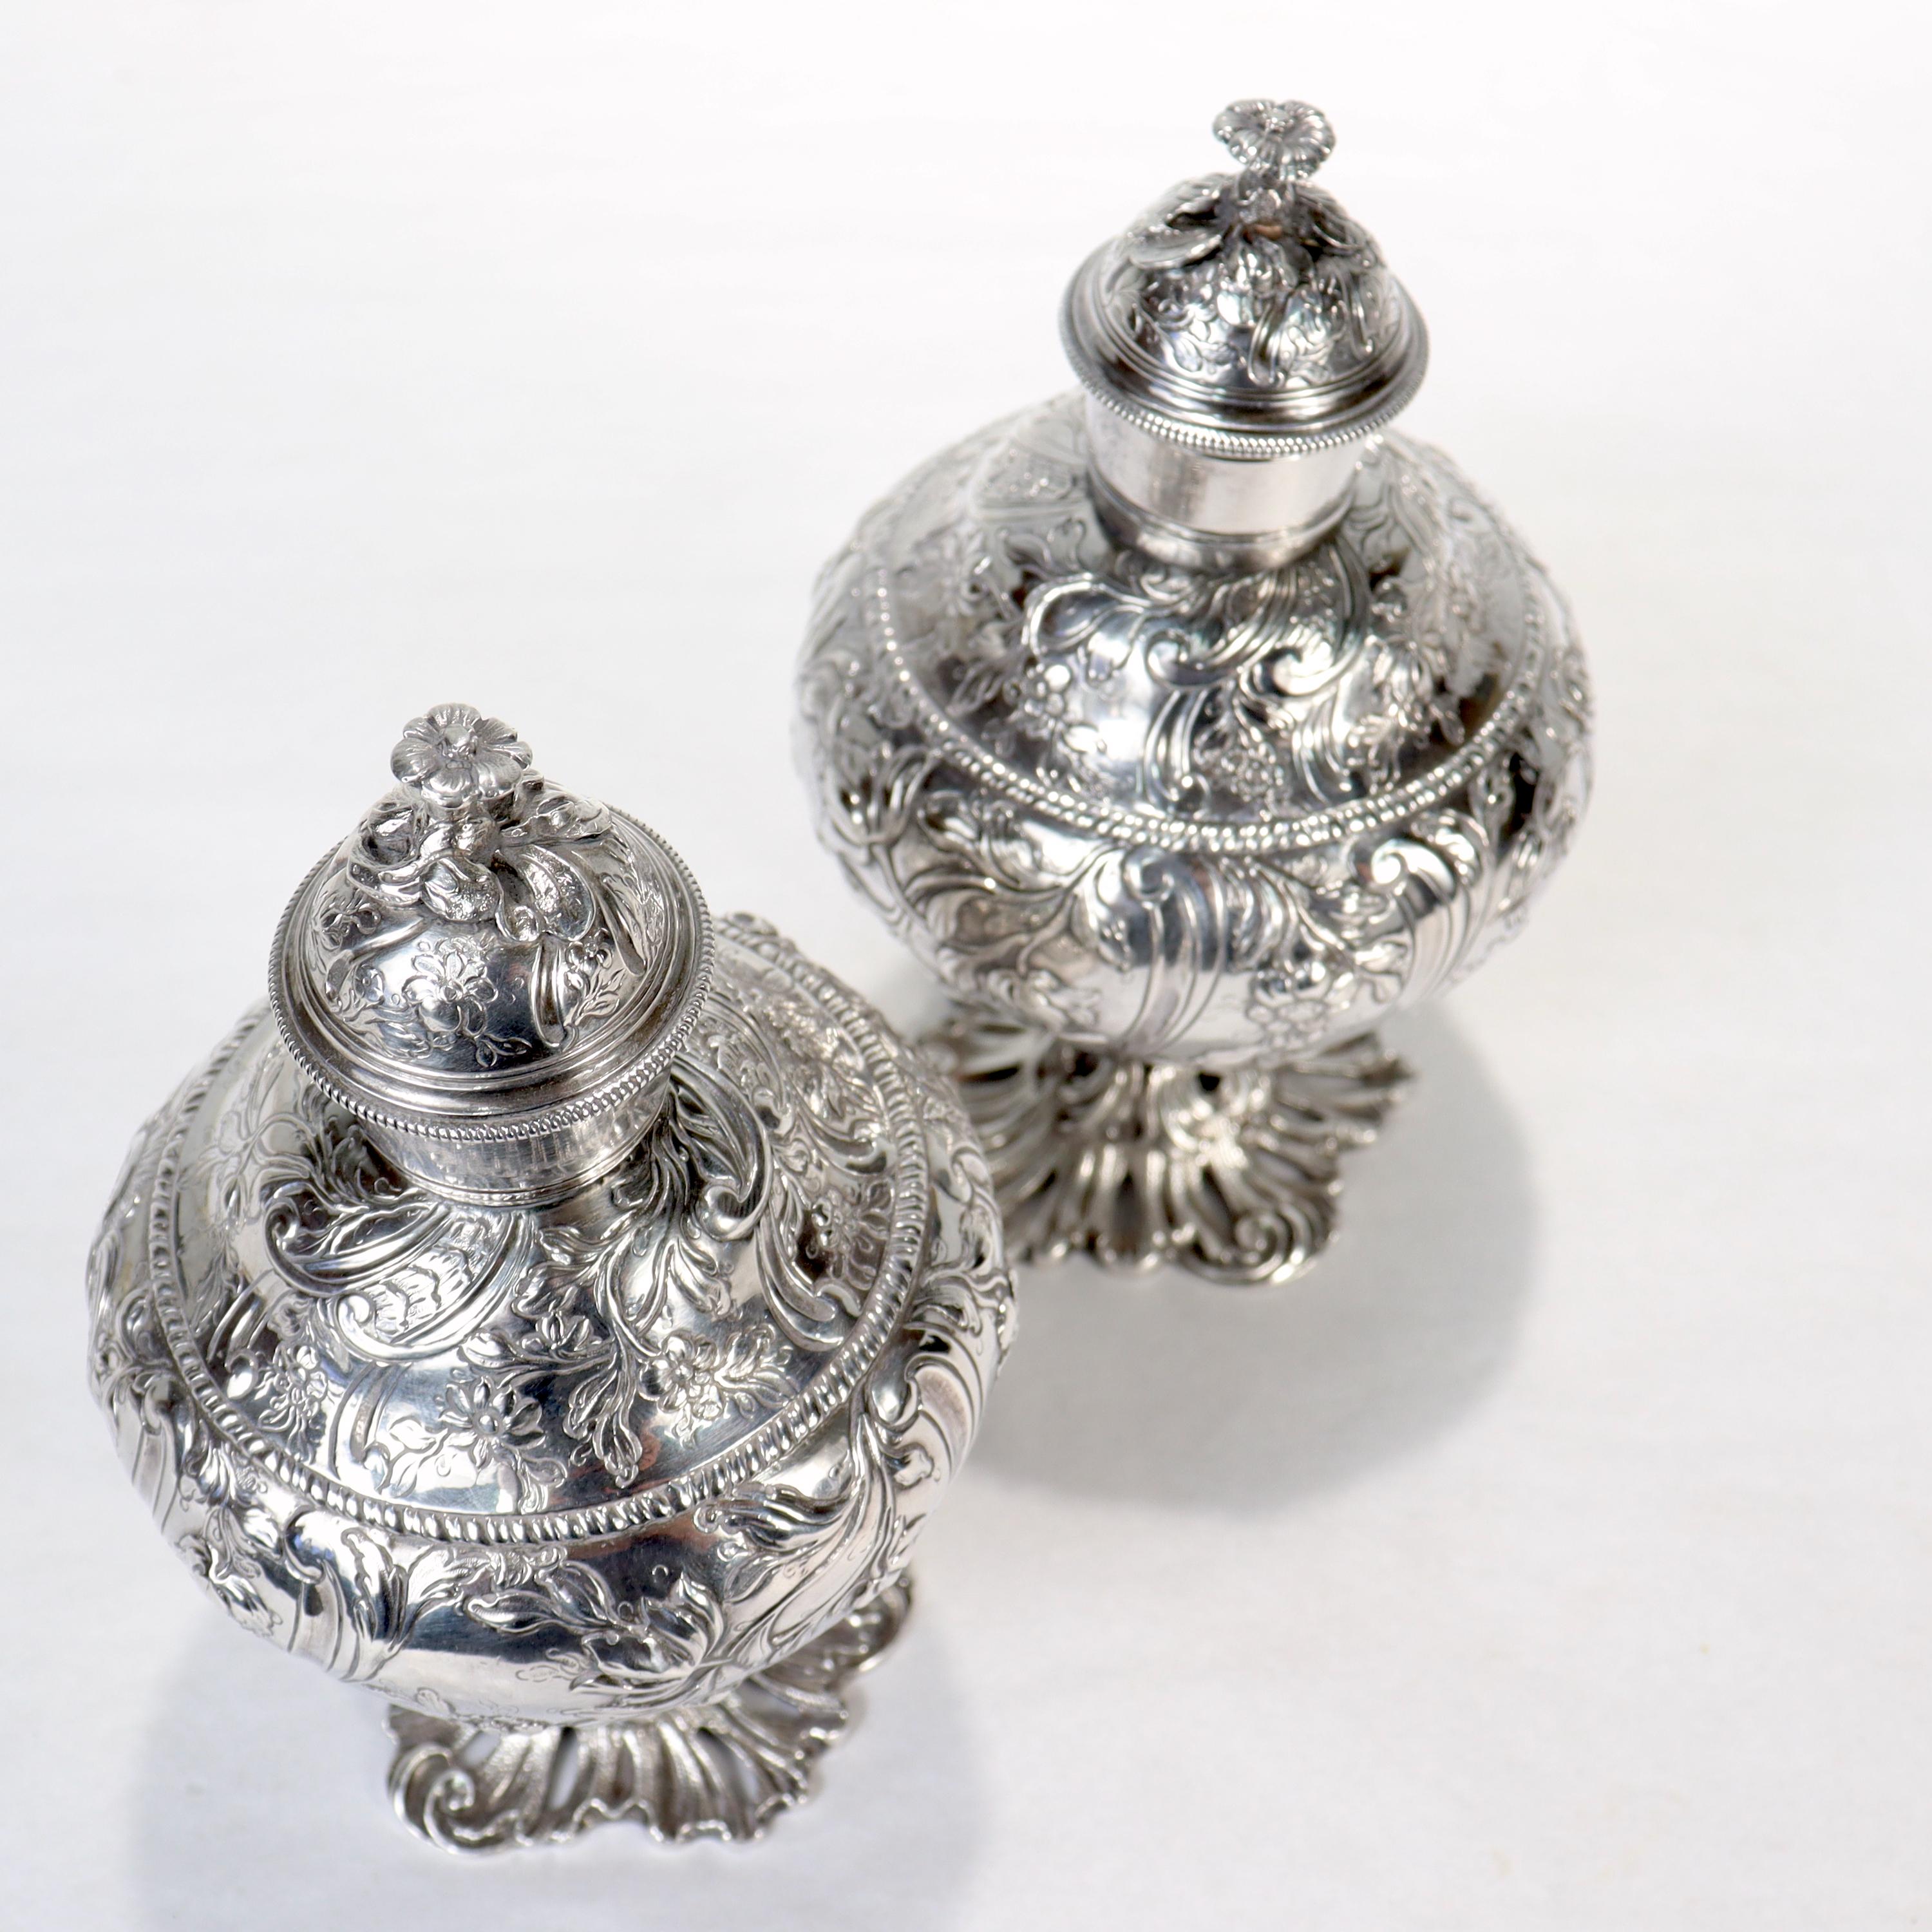 Pair of Antique Georgian English Sterling Silver Tea Caddies by Francis Crump For Sale 4